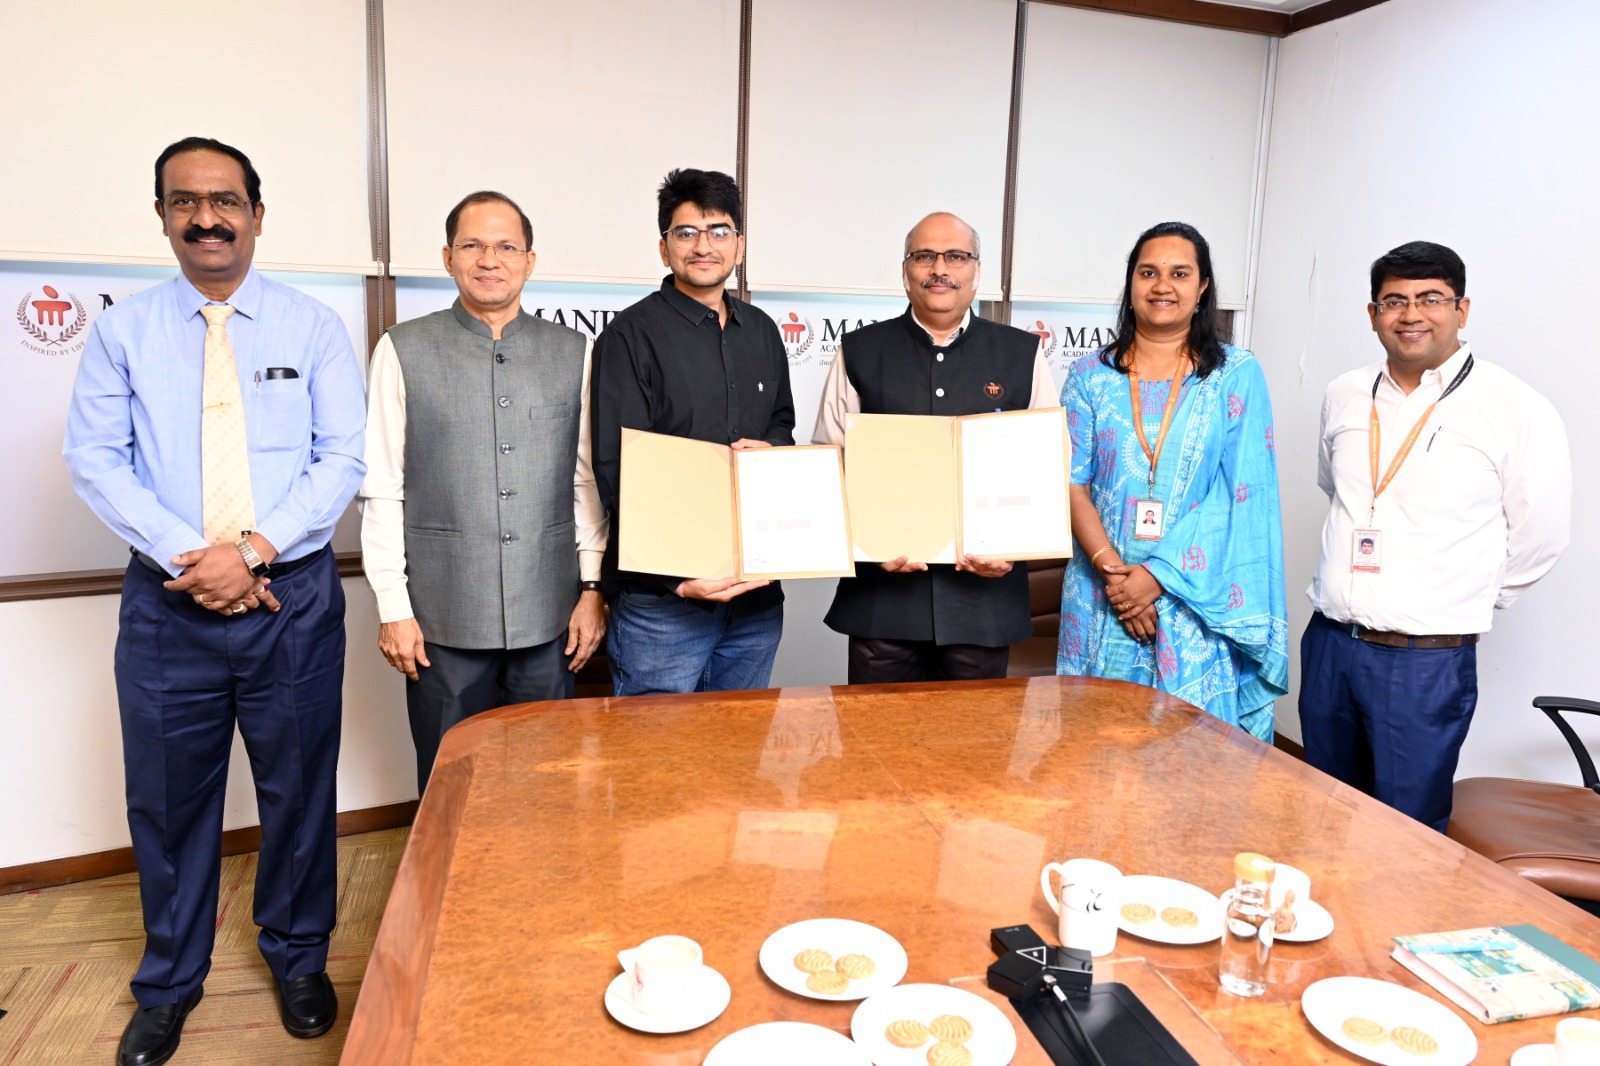 Manipal Academy of Higher Education (MAHE), and KOREAMMR Forge Partnership to Pioneer 3D Bioprinted Medical Solutions